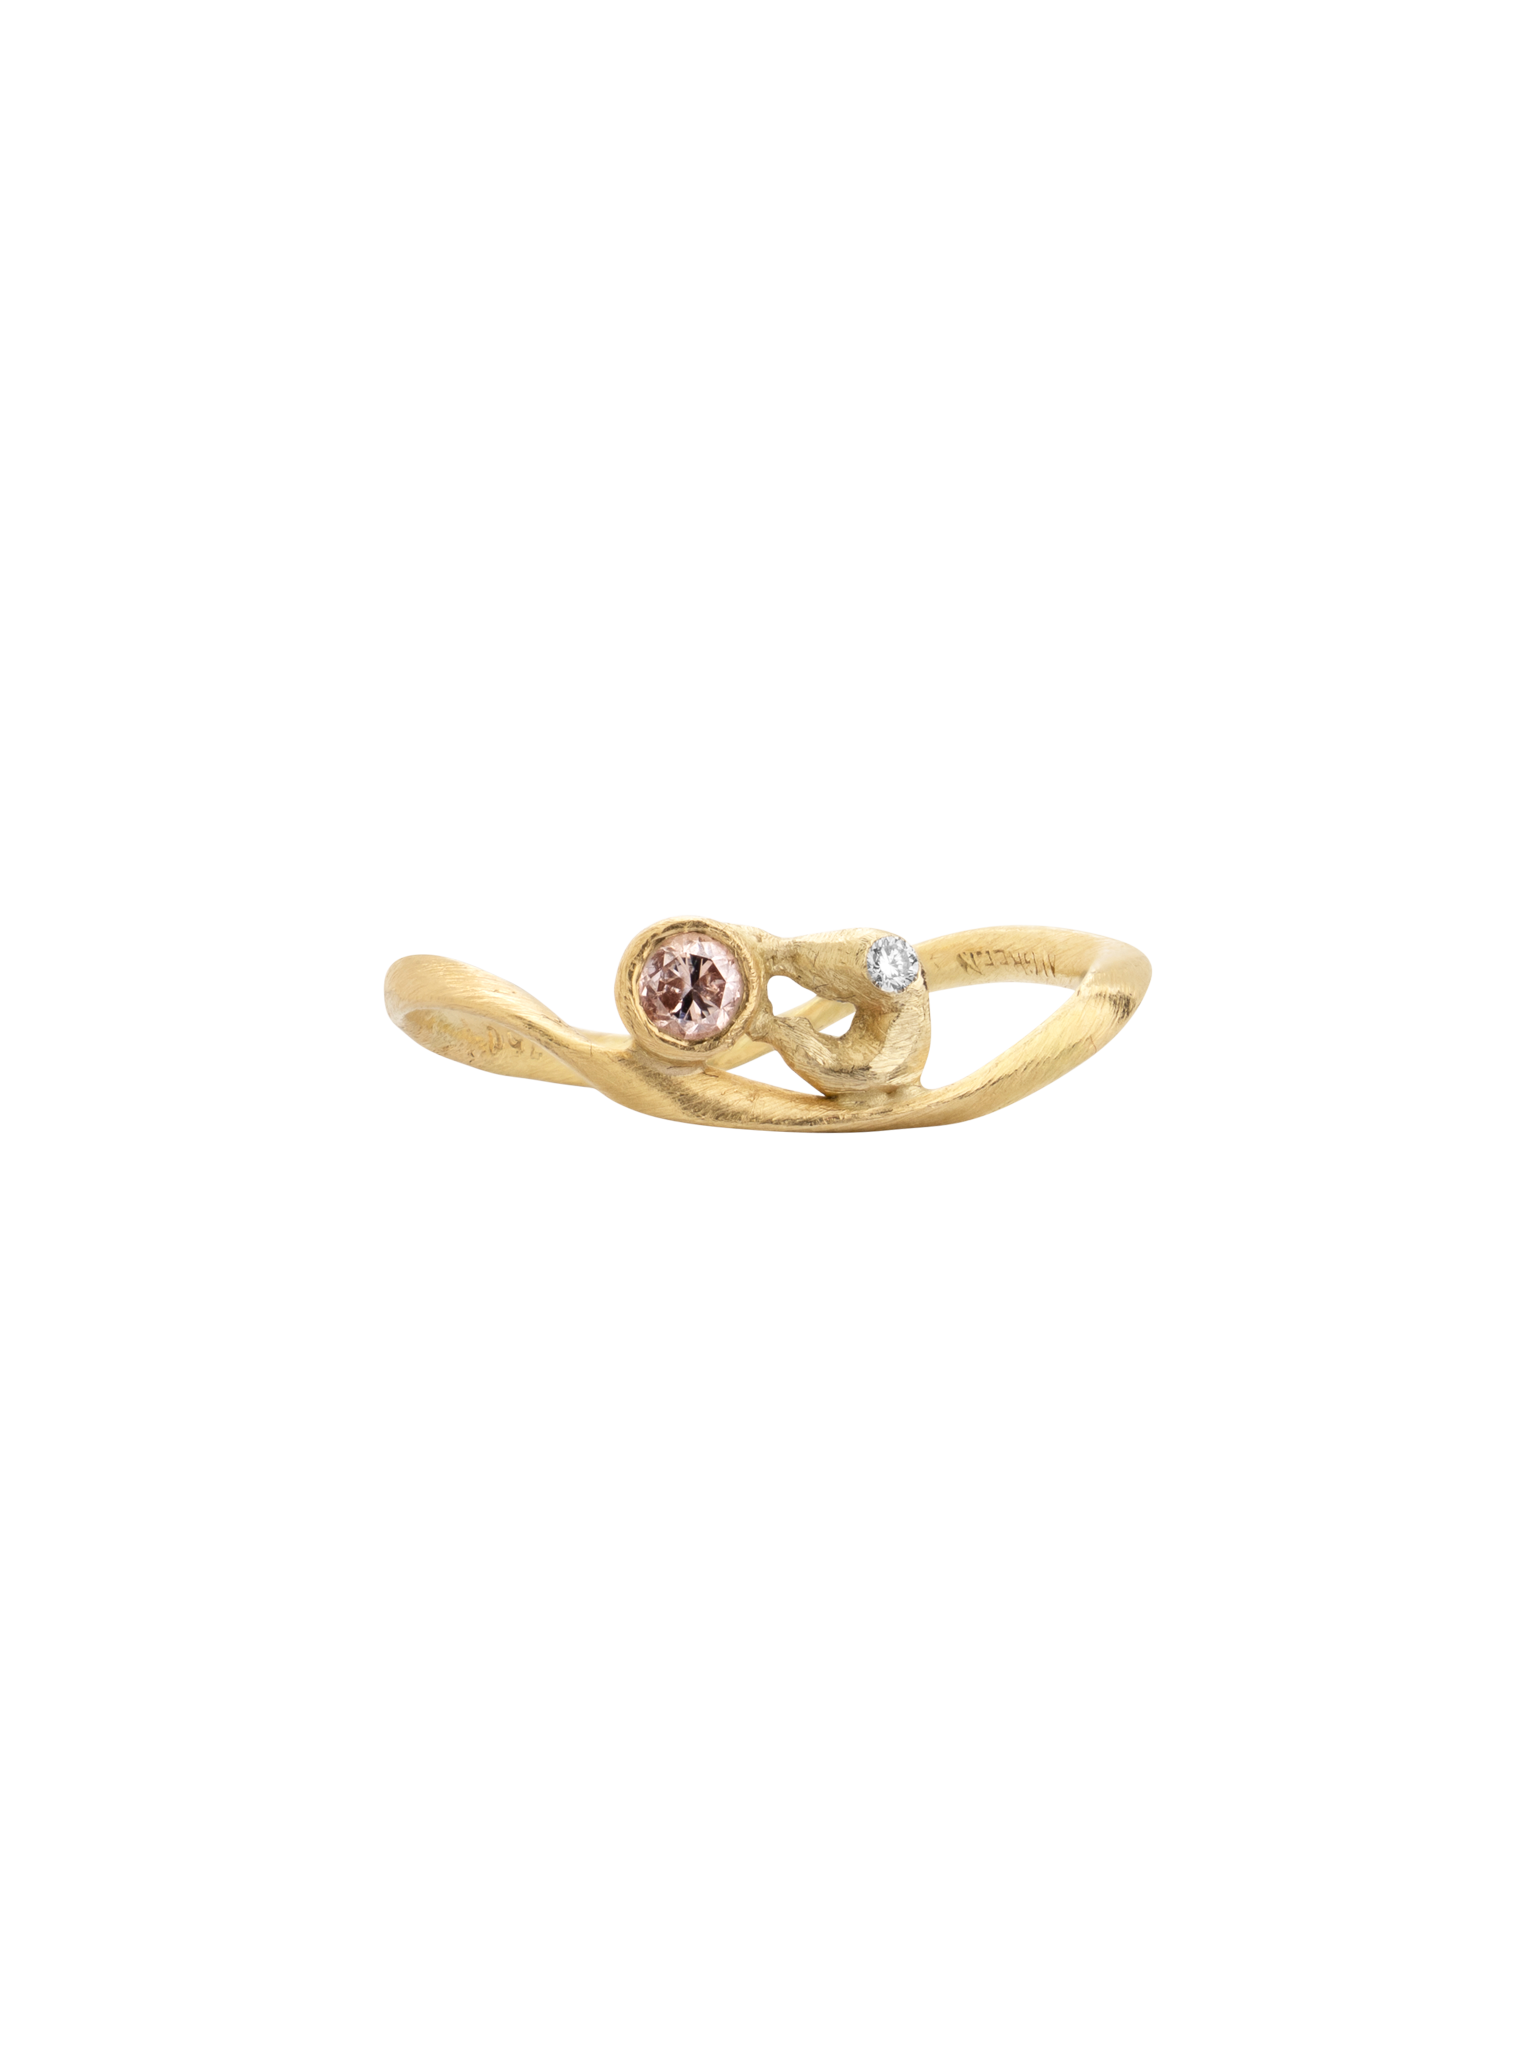 Flair pink and white diamond ring